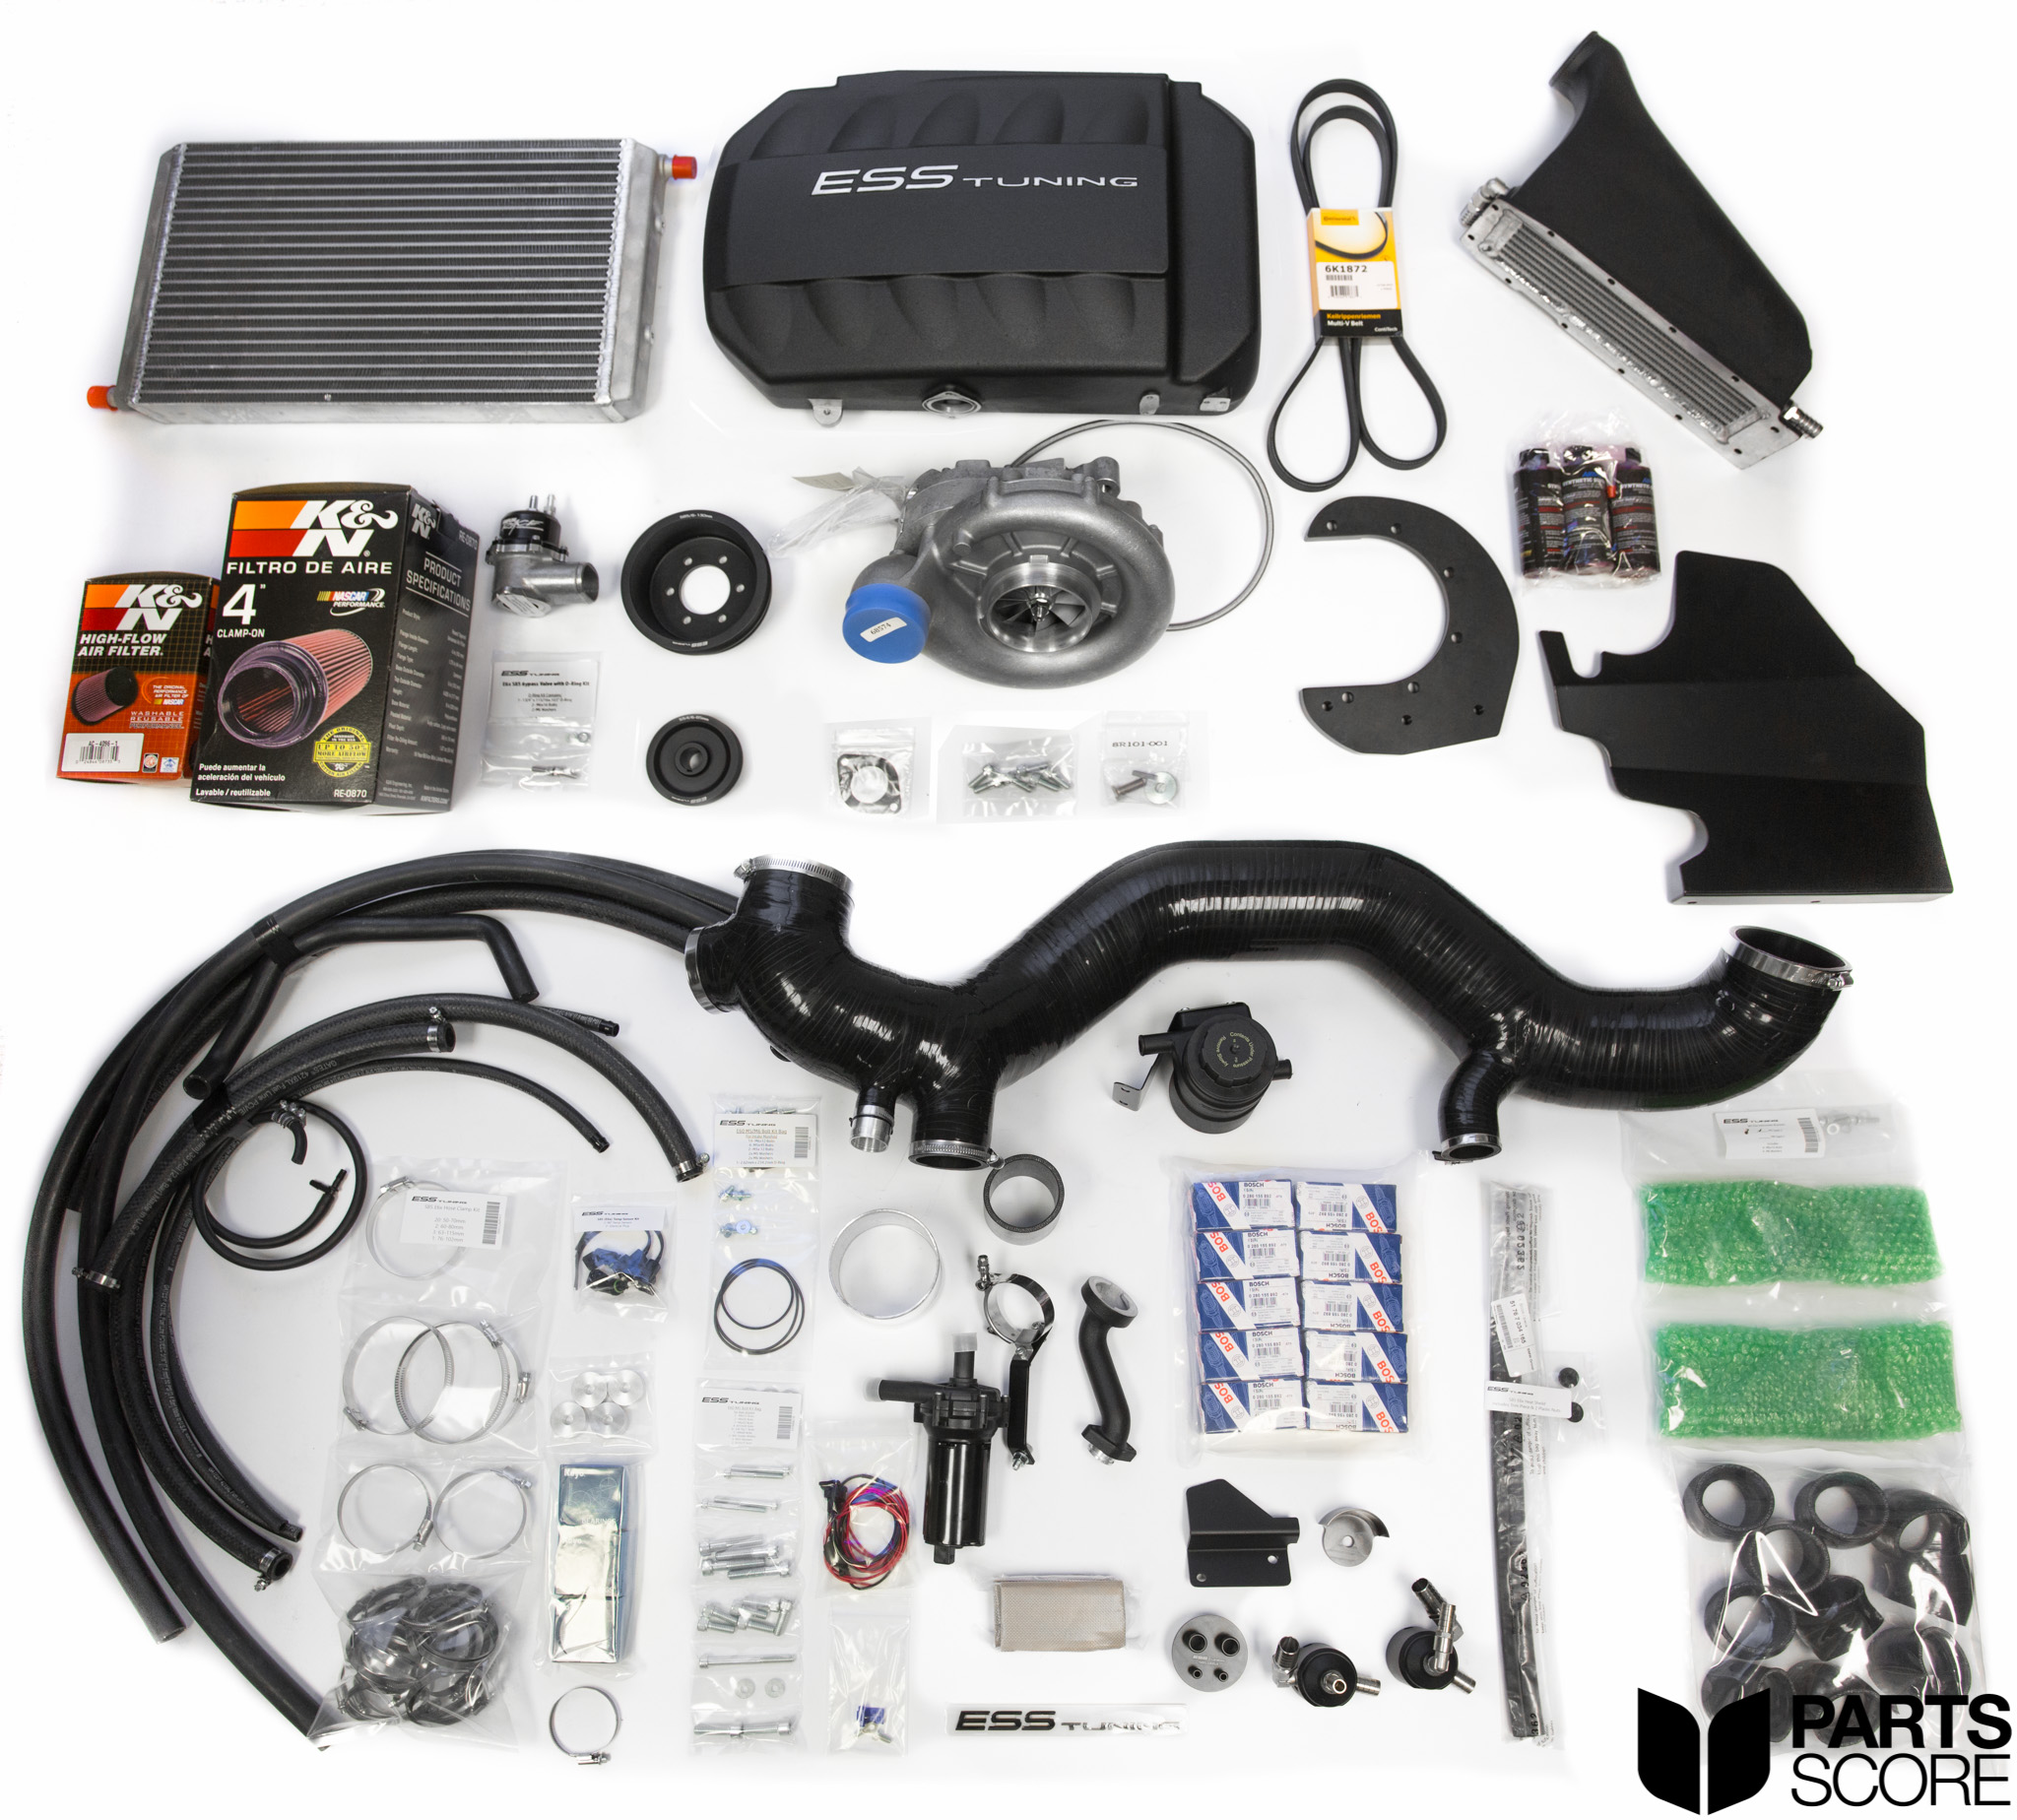 parts score, partsscore, ess tuning, ess, ess tuned, ess supercharger, ess supercharged, supercharged, m5, e60, e60 m5, e60 m5 supercharger, m5 supercharger, supercharged e60, supercharged m5, bmw performance, bmw, bmwm, bmw m power, bmw m performance, superchargedbmw, v10, s85, supercharged s85, nogtrsonthedyno, boost, bmw v10